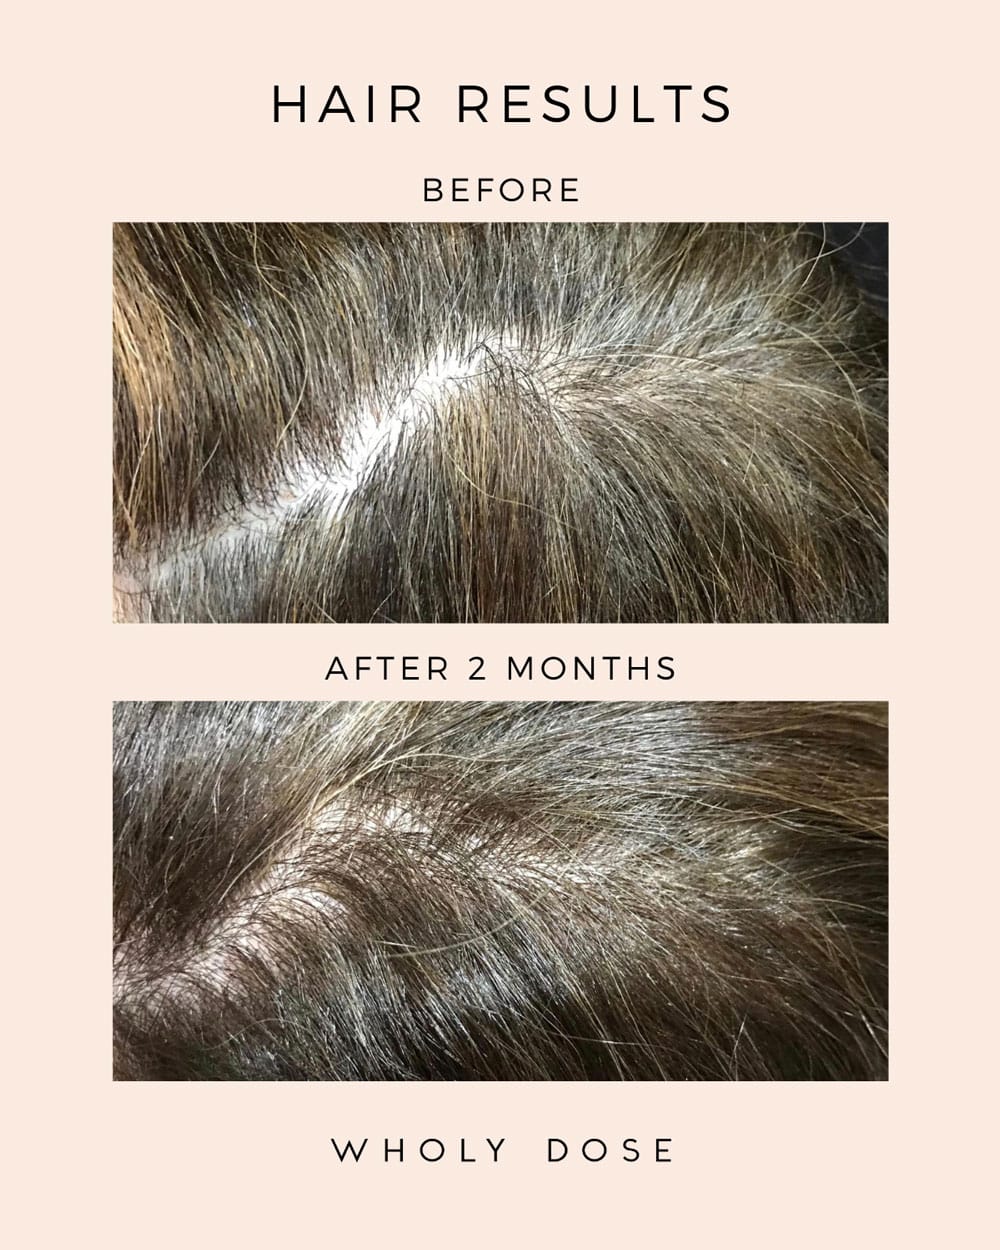 Wholy Dose Supplement Mix Collagen Unflavored Hair results, showing a before and after two months pictures of the part in someone's hair with noticably improved hair growth